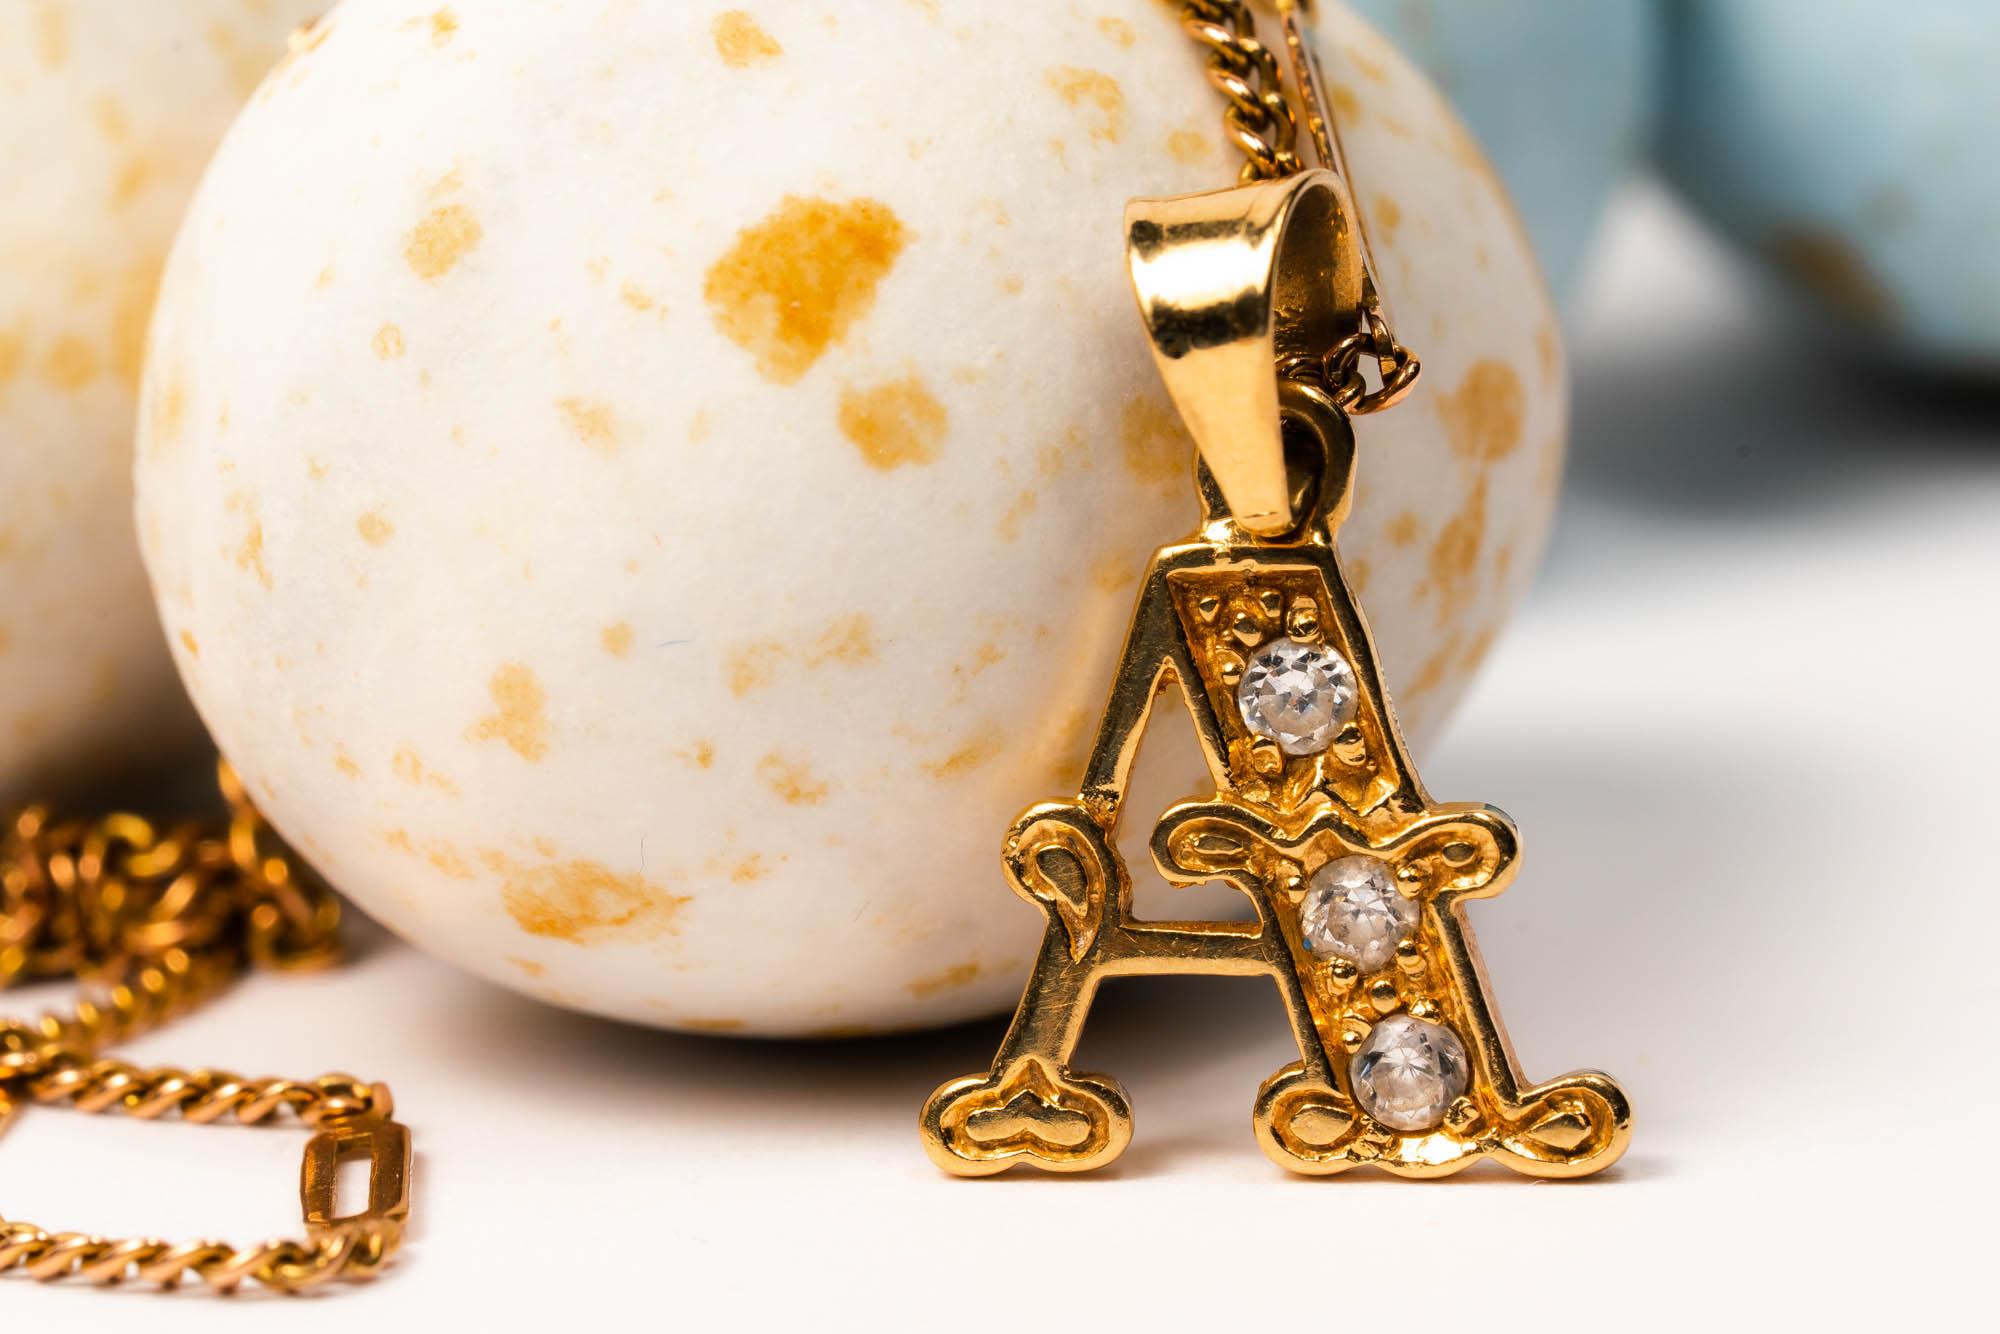 Here we have a lovely vintage 18k yellow gold letter A charm! 

The letter has a beautiful detailing and accented with three sparkling diamonds. On its bale its marked with a Masters' Mark and 18kt gold purity stamp.

This great vintage pendant will